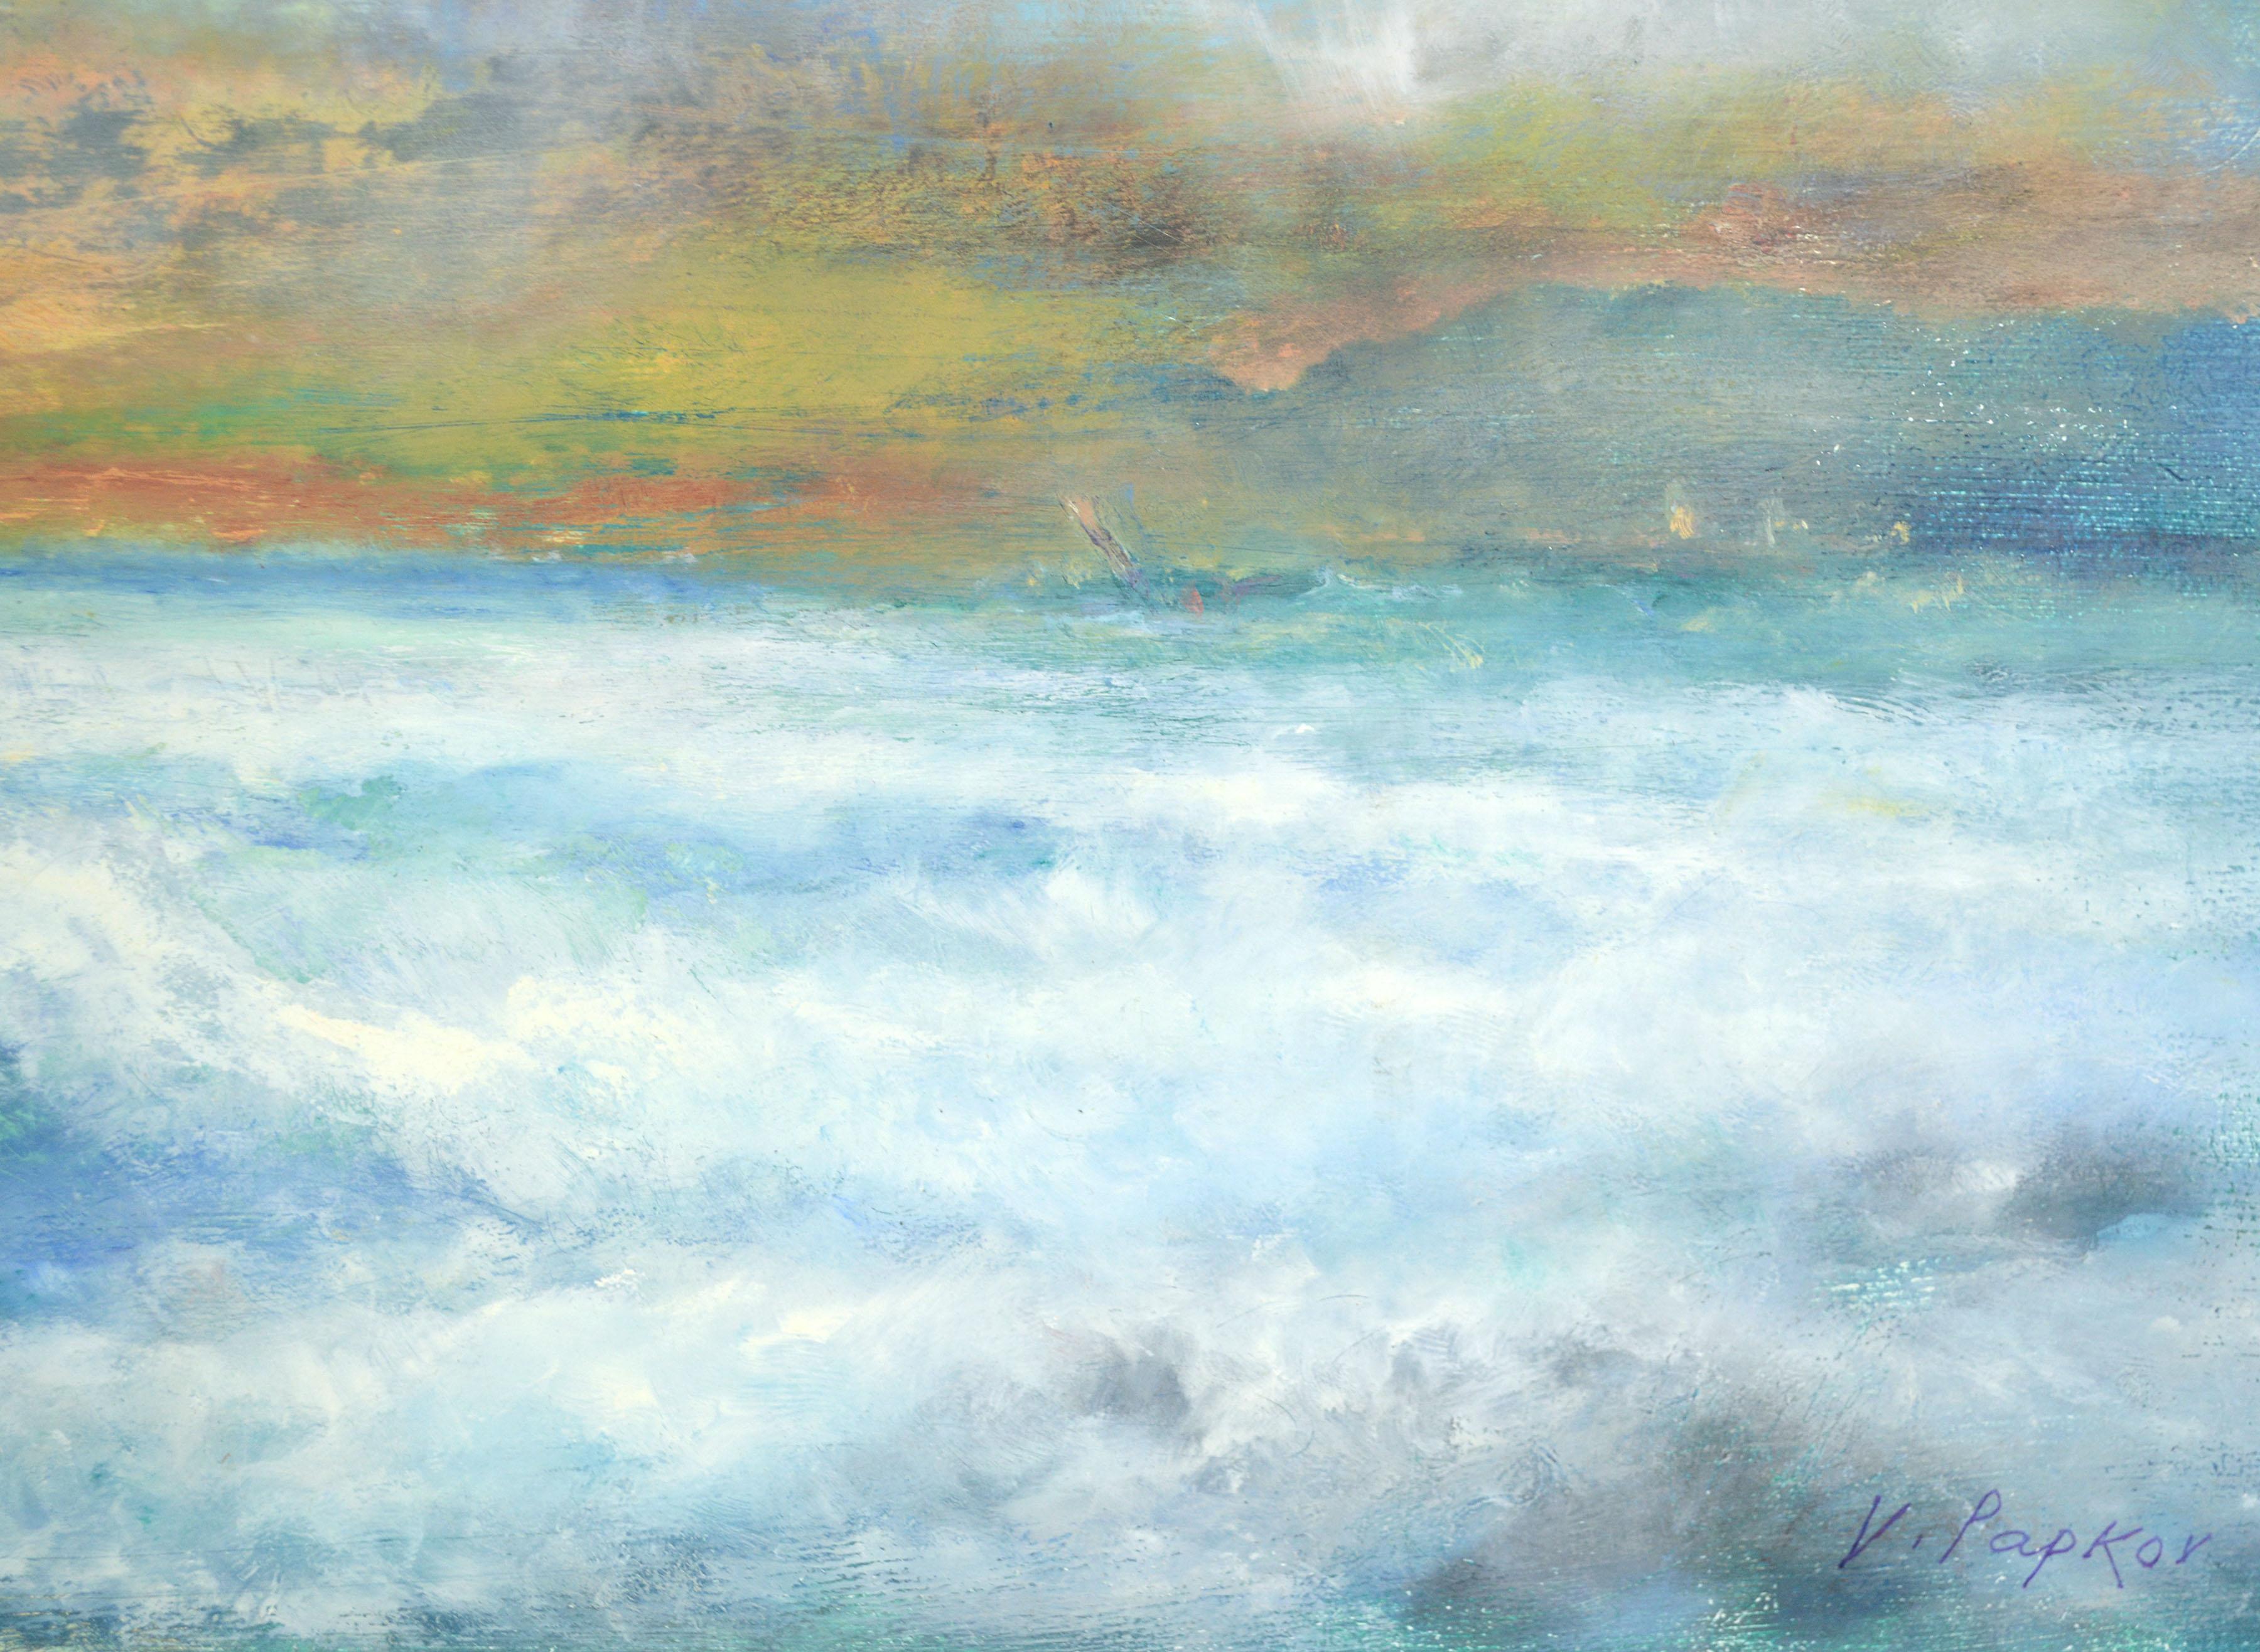 Expressive and colorful seascape by Vasil (Victor) Papkov (20th Century). The vivid cyan blue churning waves mirror the sky above, with a glowing orange sunset splitting the canvas on the horizon. A distant mountain range fades into the misty